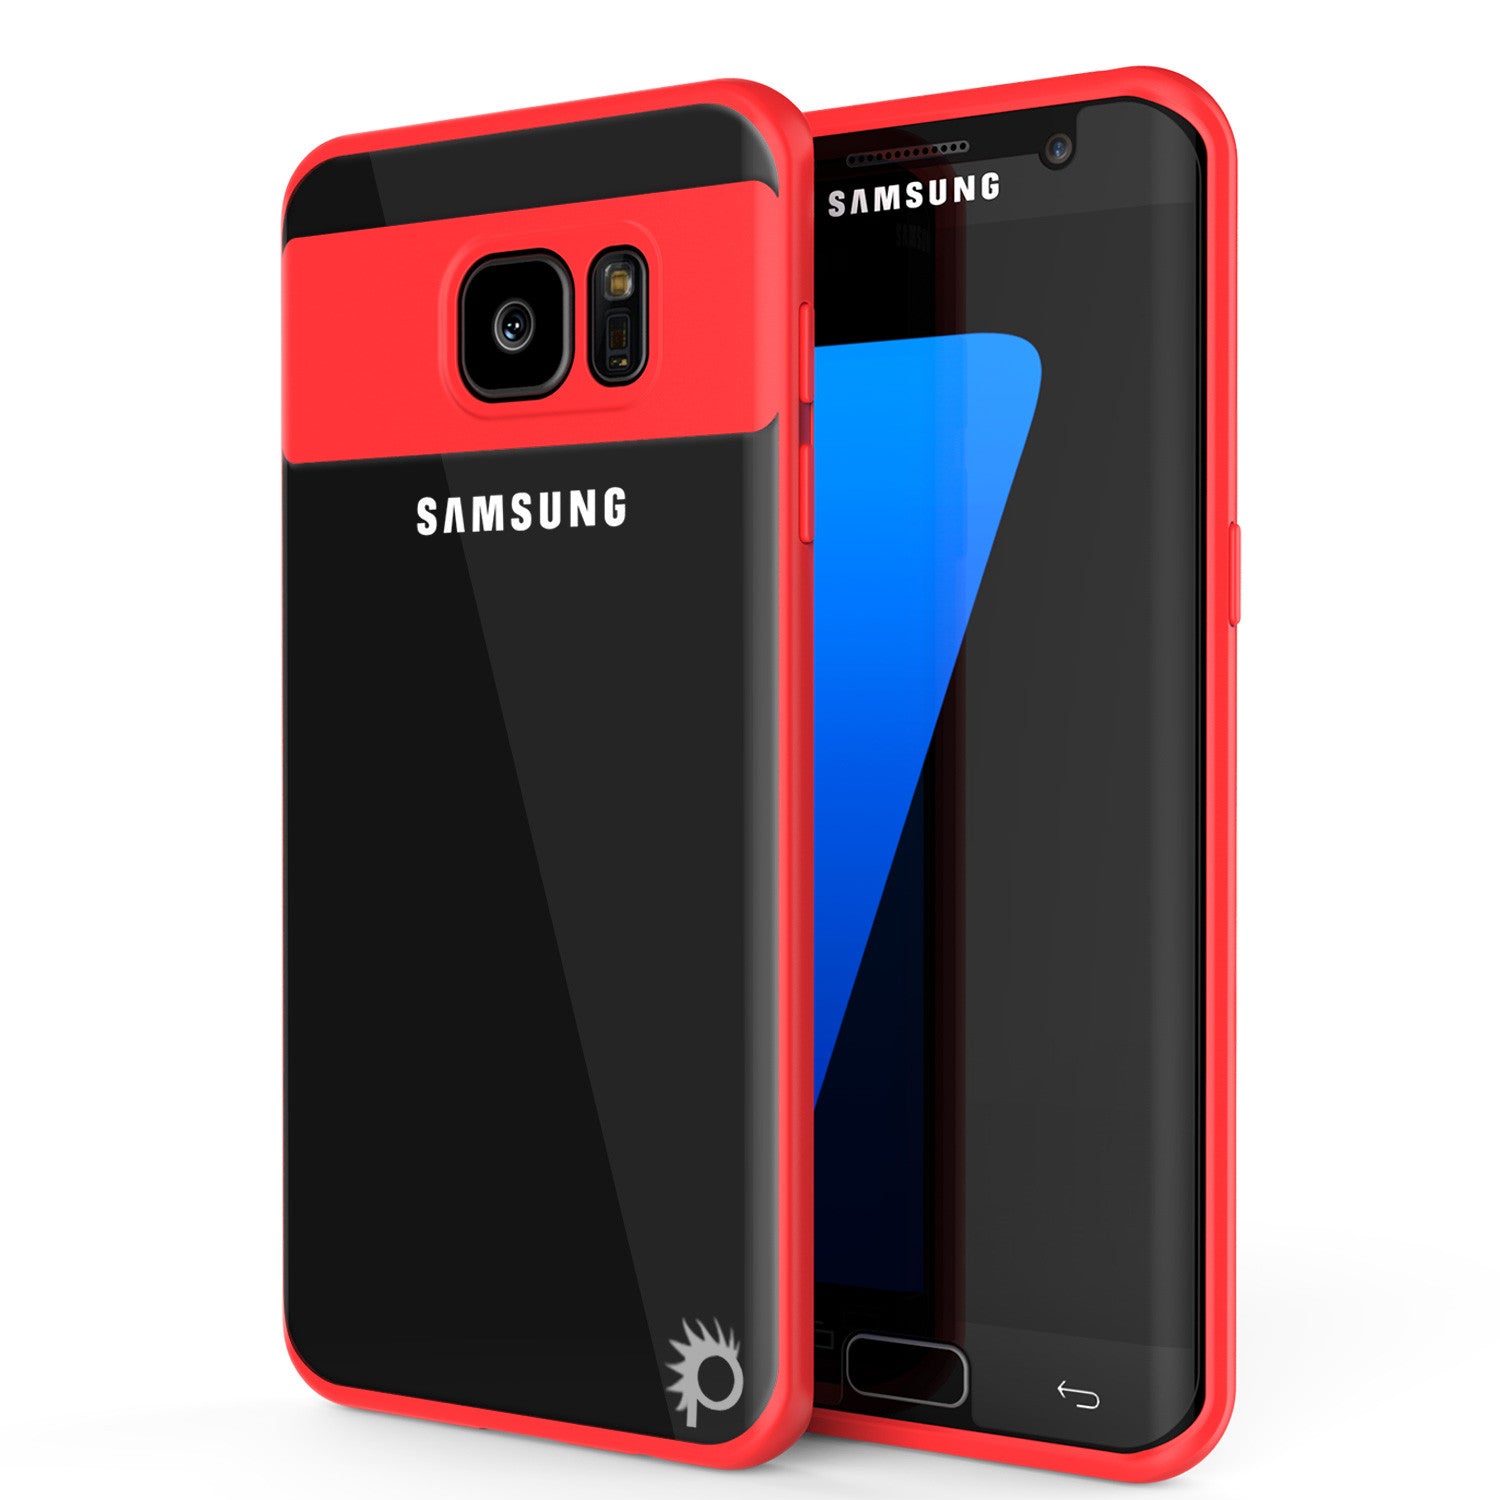 Vooruit Berouw Indringing Galaxy S7 Edge Case [MASK Series] [RED] Full Body Hybrid Dual Layer TP –  punkcase